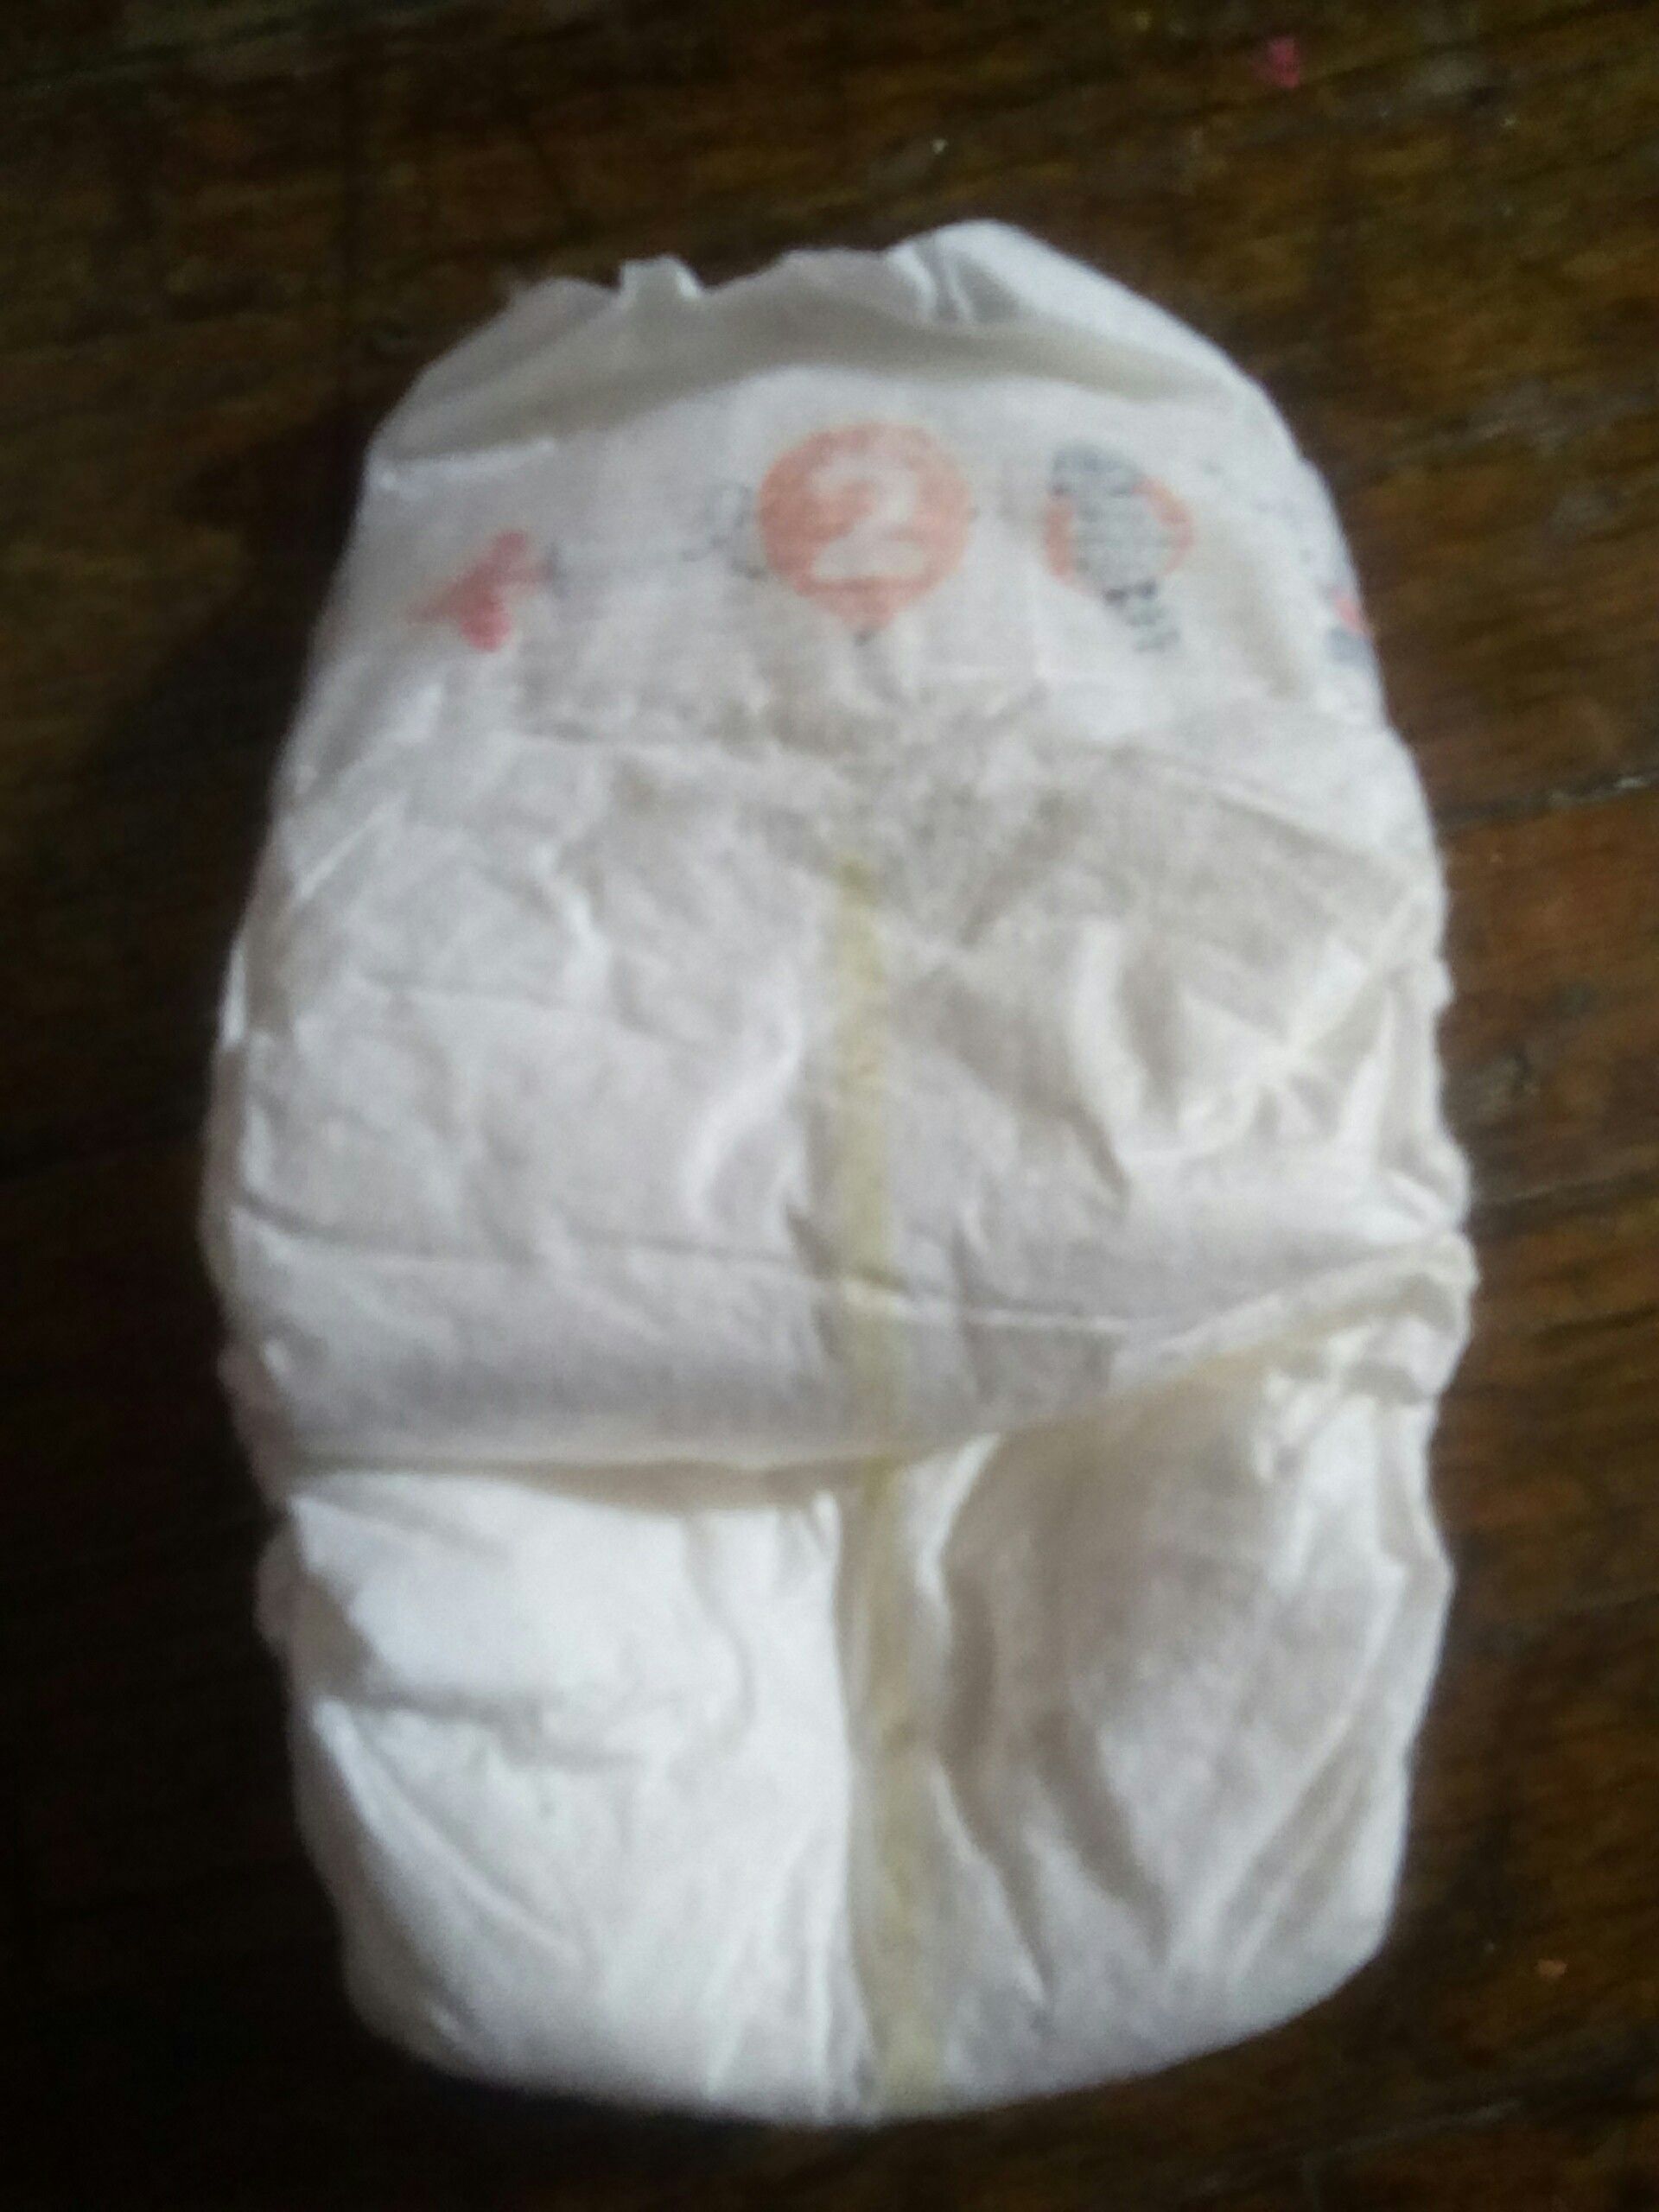 Diapers size 2